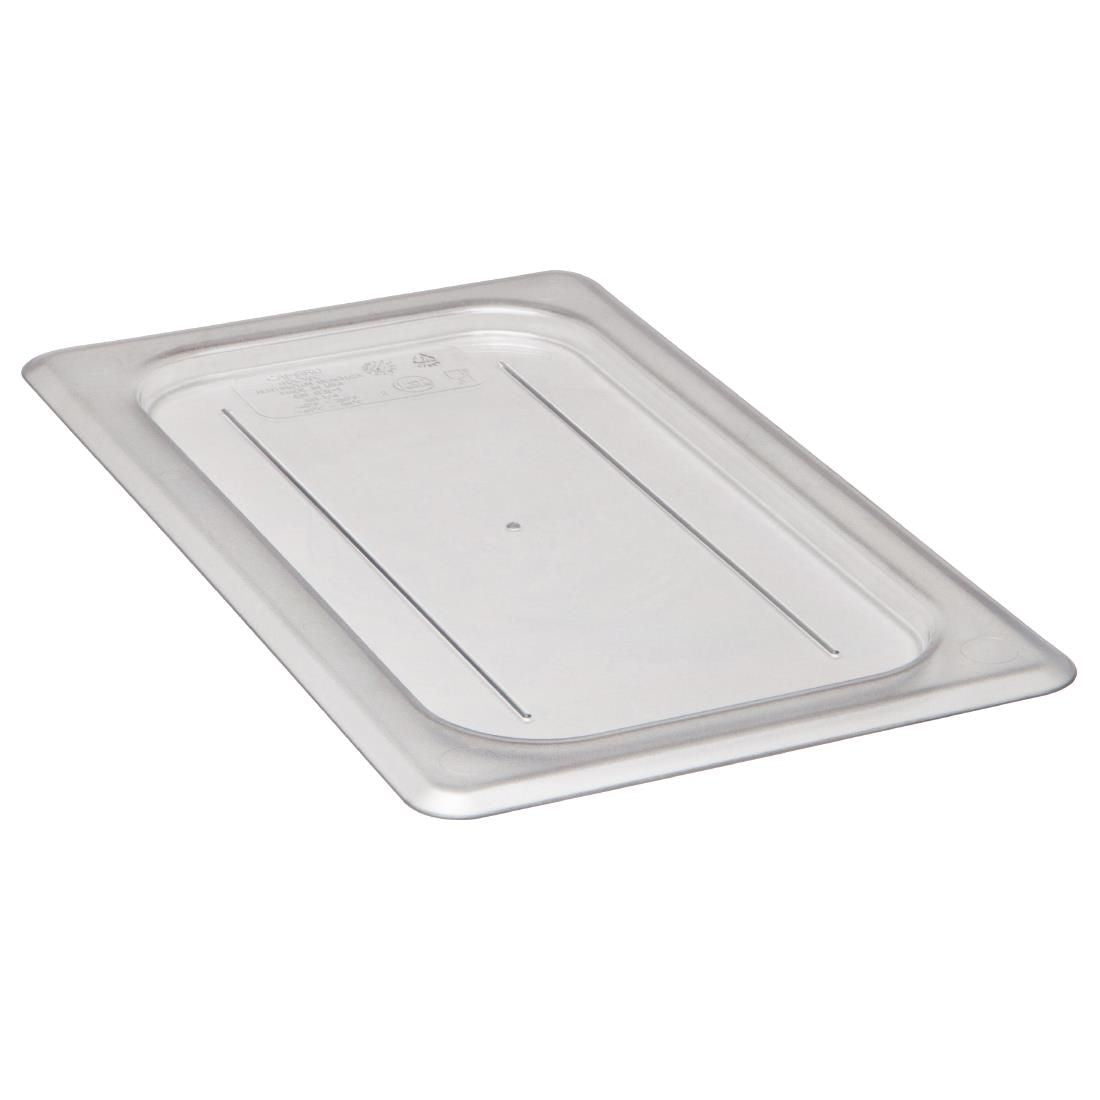 DC665 Cambro Clear Polycarbonate 1/4 Gastronorm Lid JD Catering Equipment Solutions Ltd